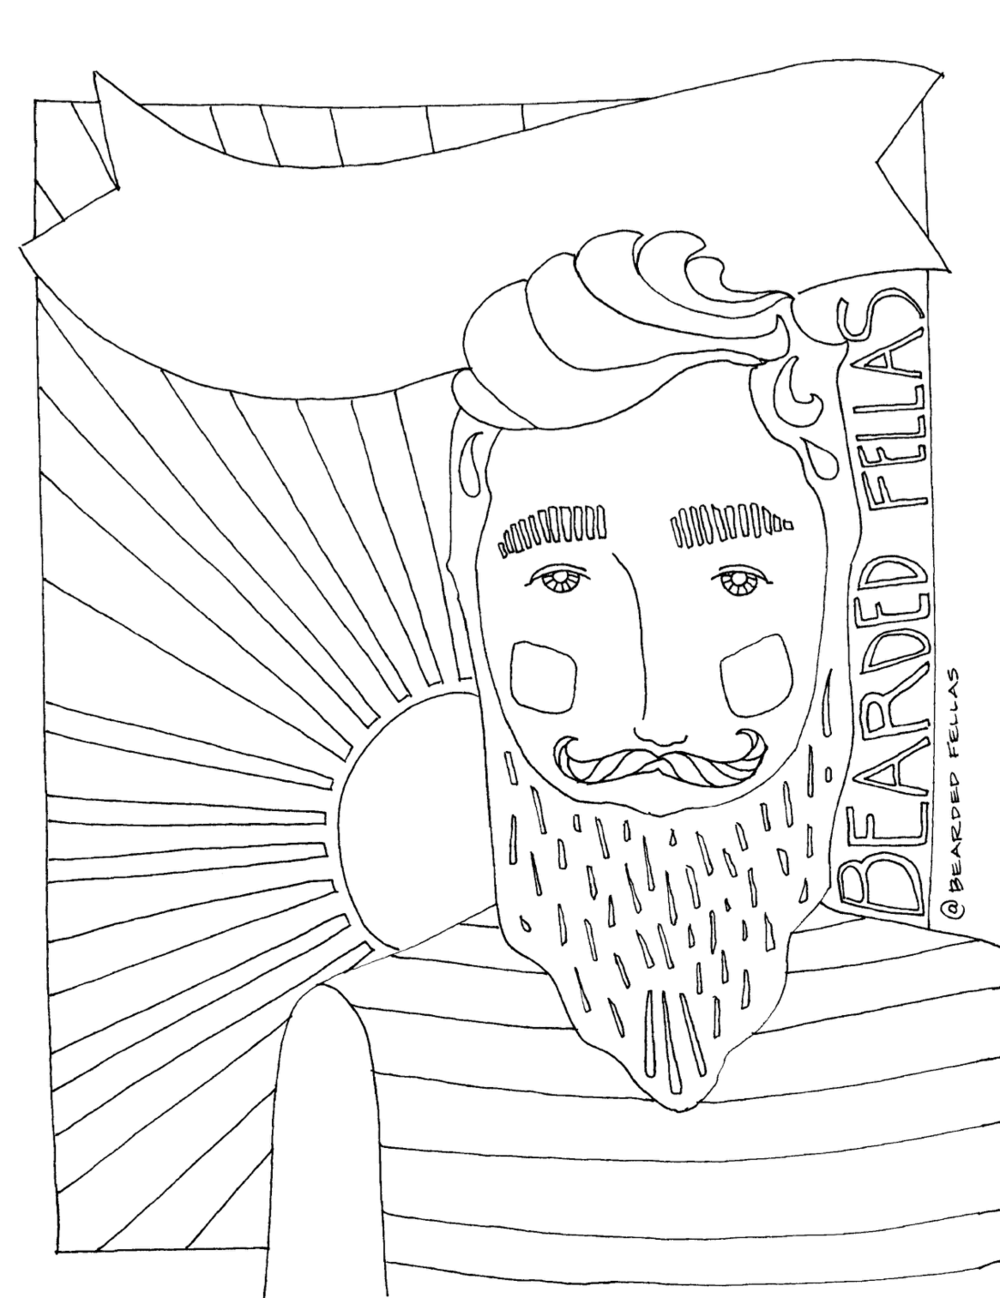 Bearded Fella with Sun Burst Coloring Page